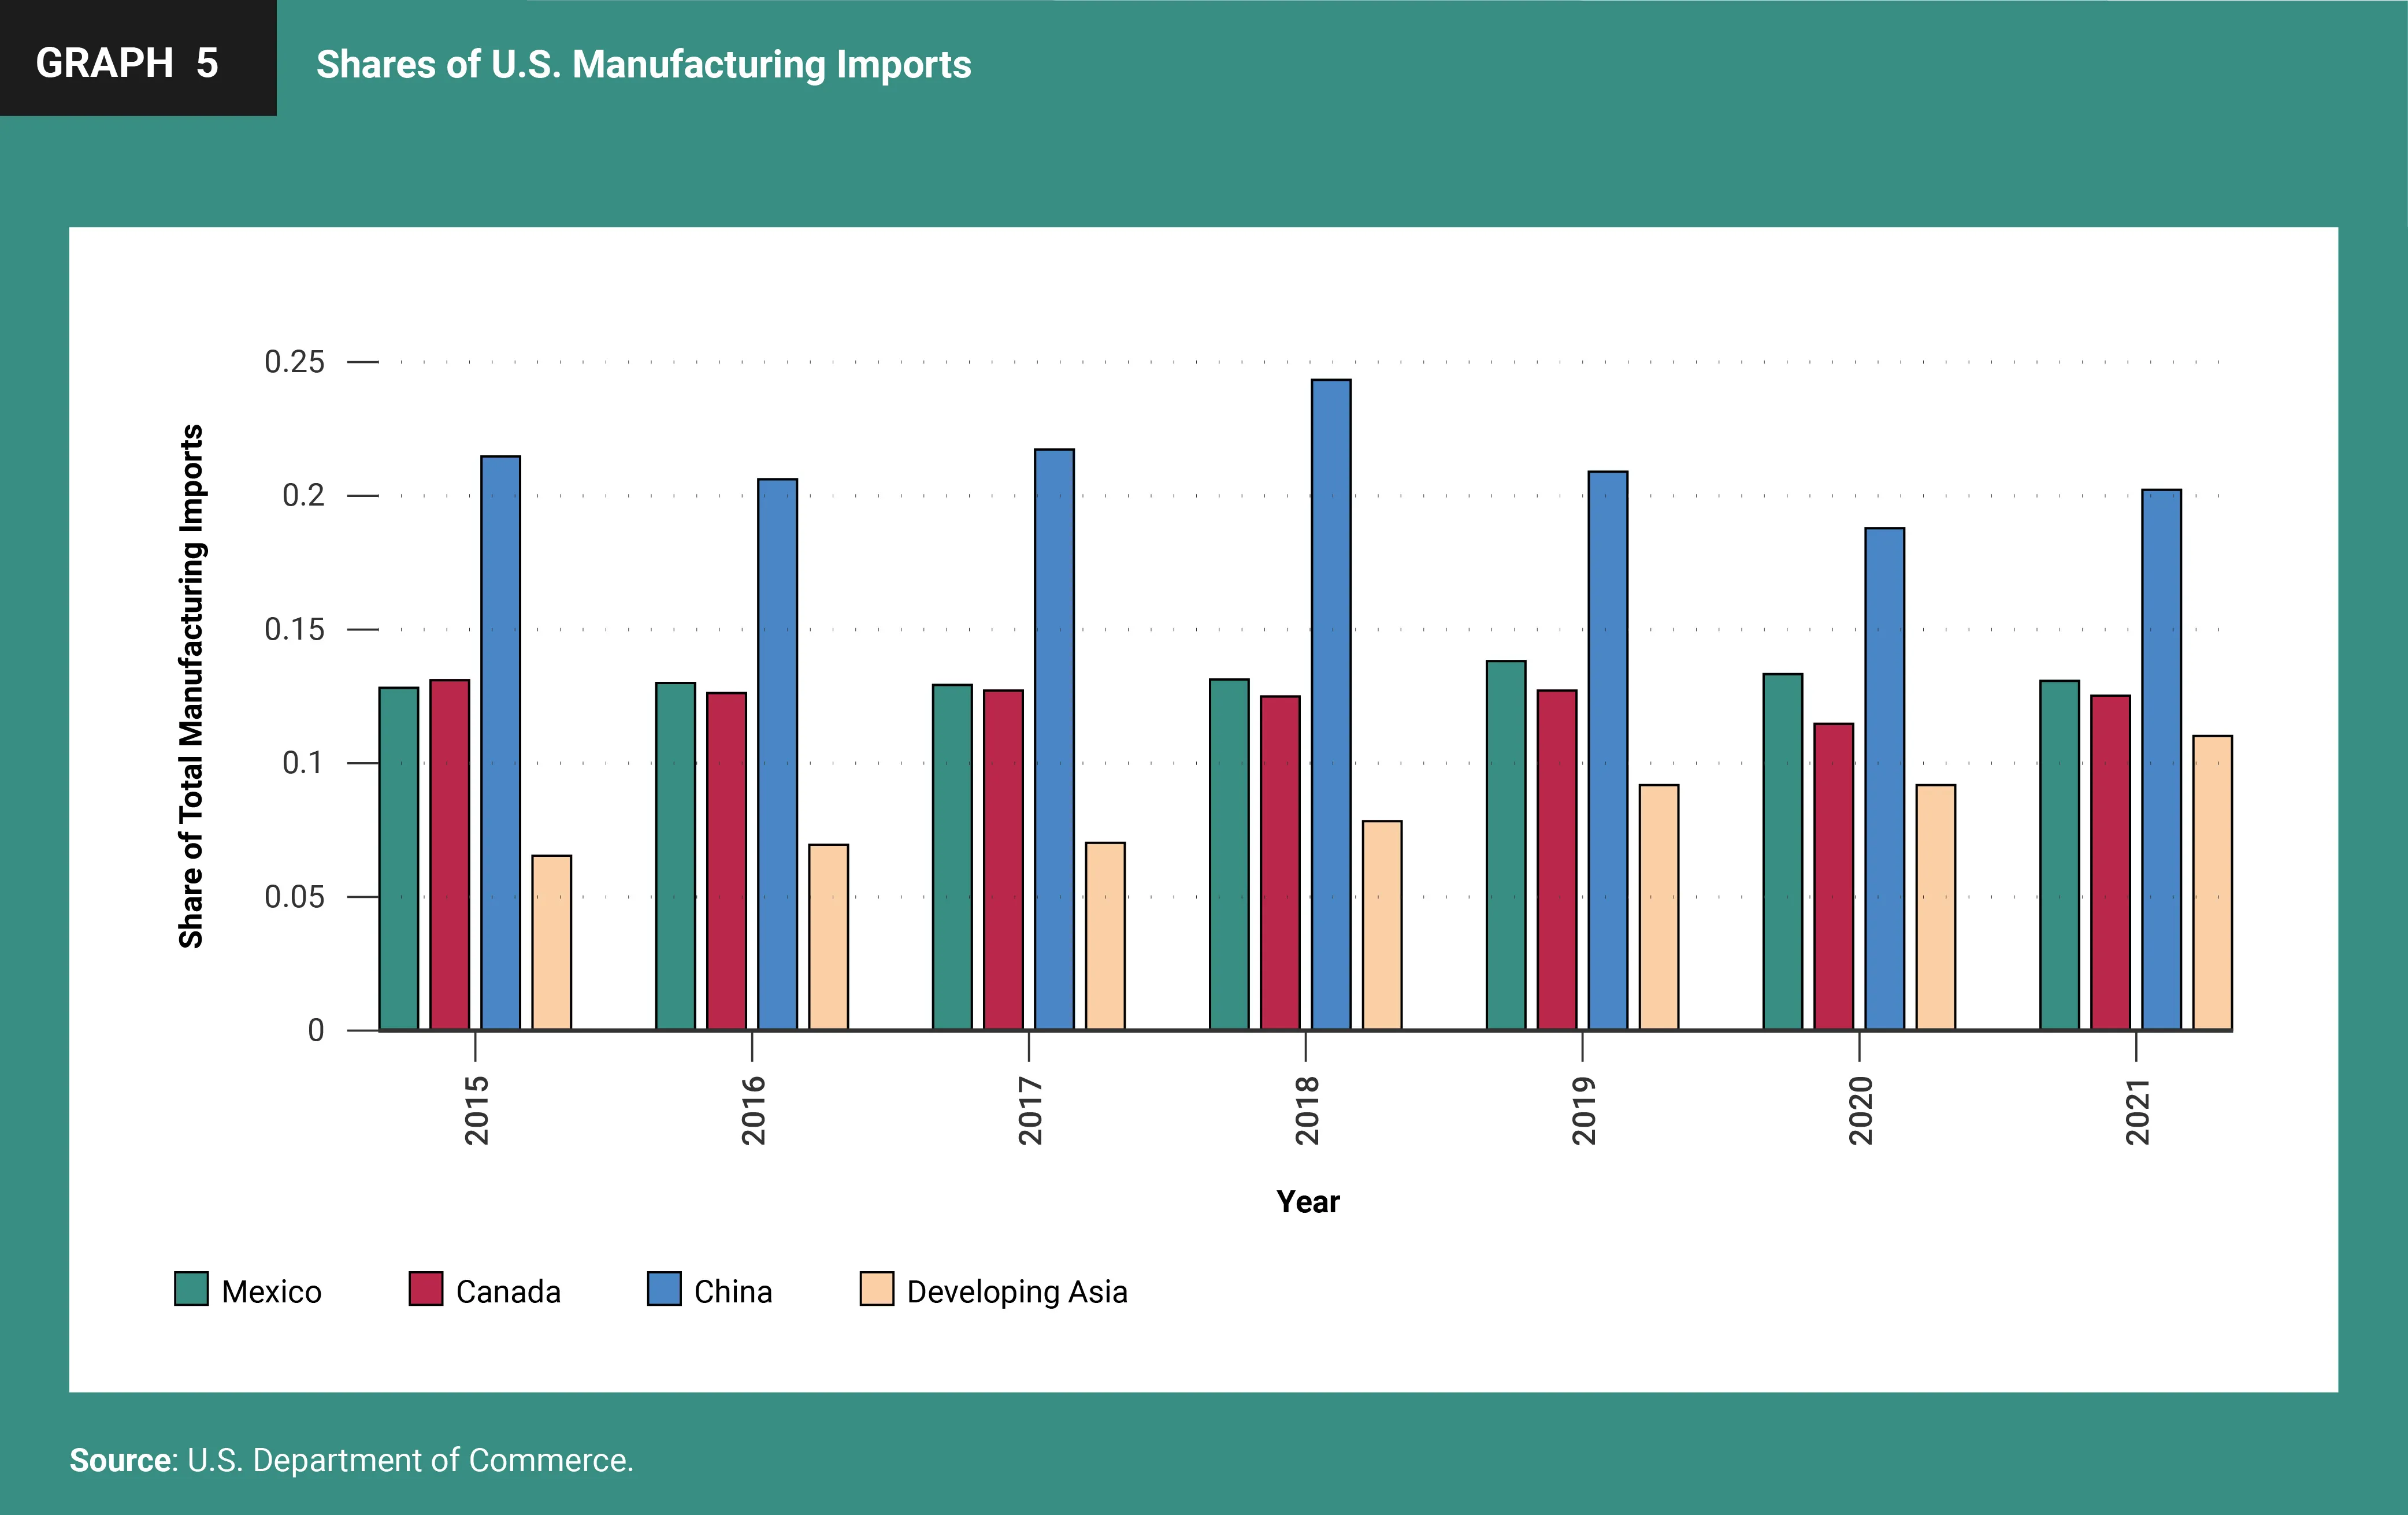 Shares of U.S. Manufacturing Imports